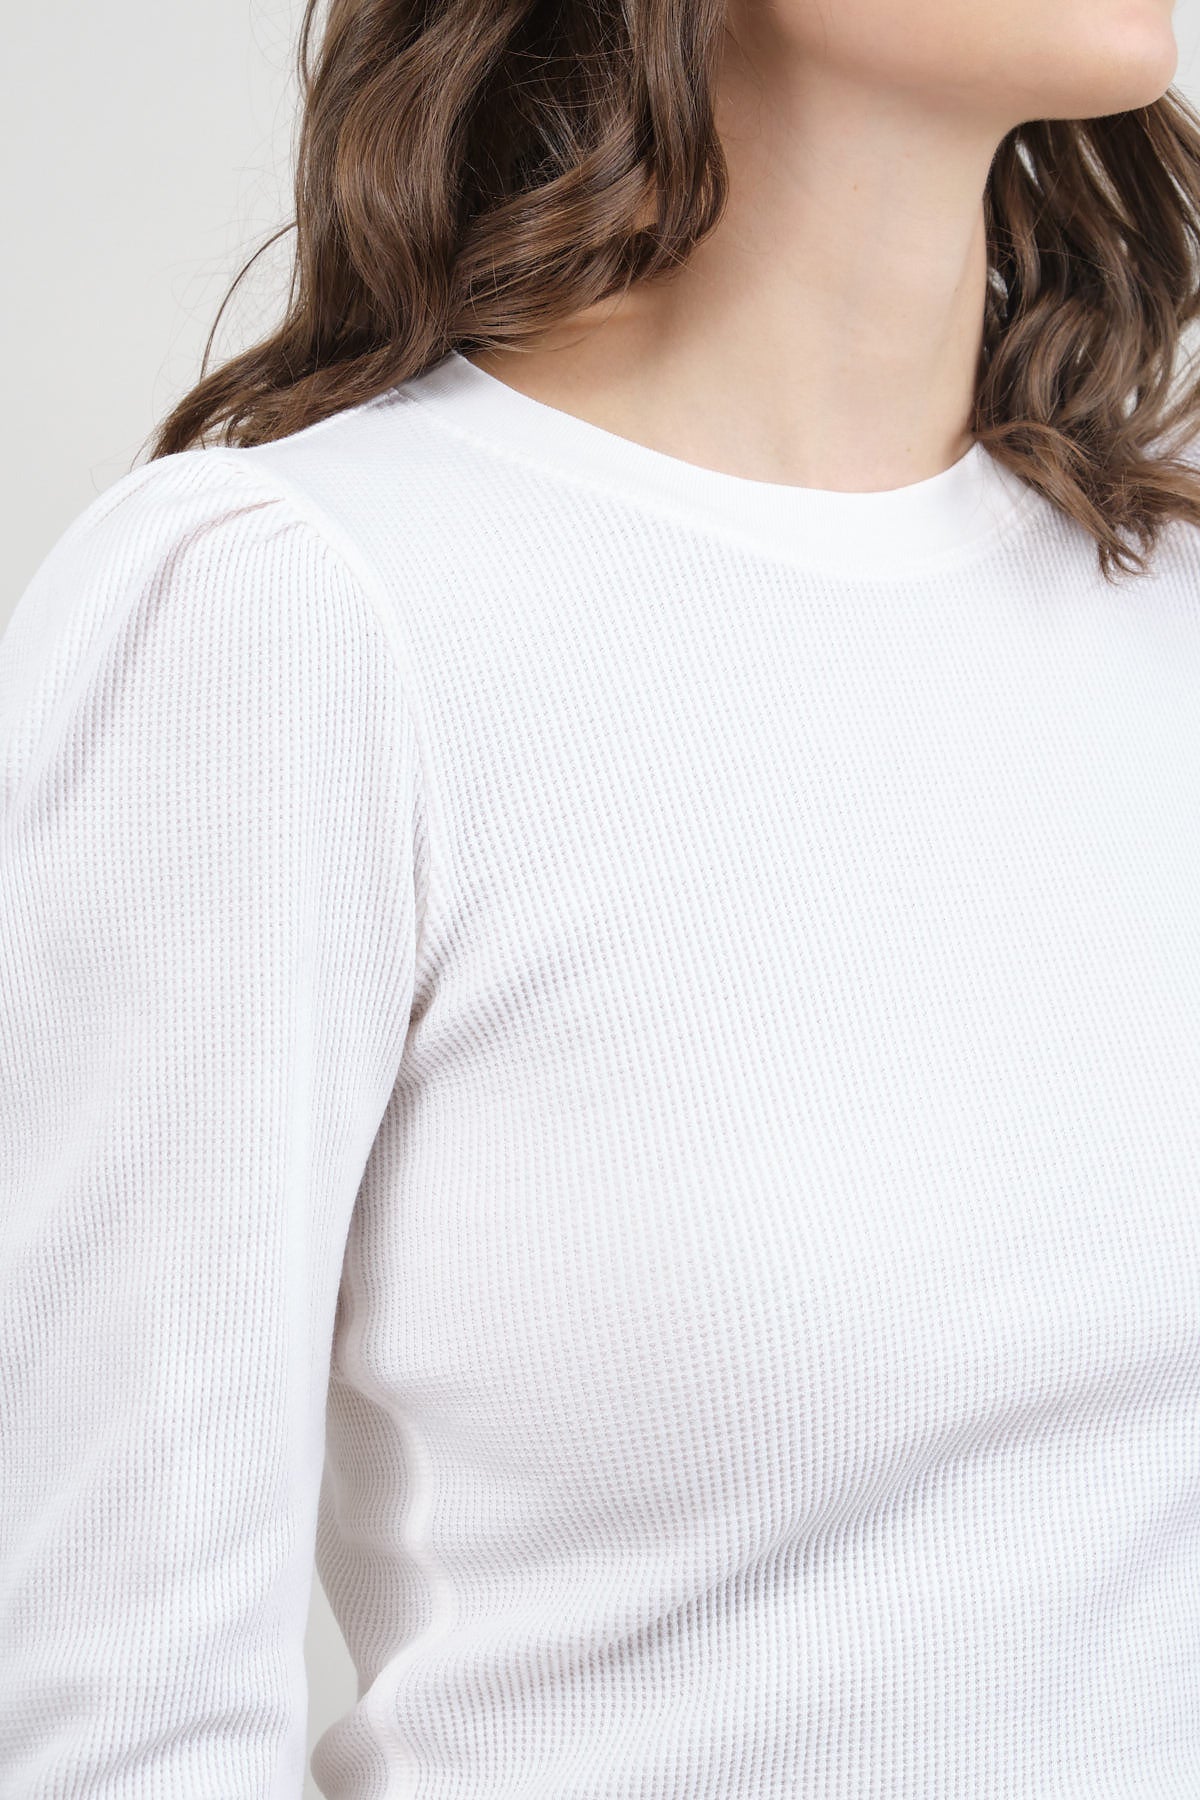 Neckline on Girly Thermal